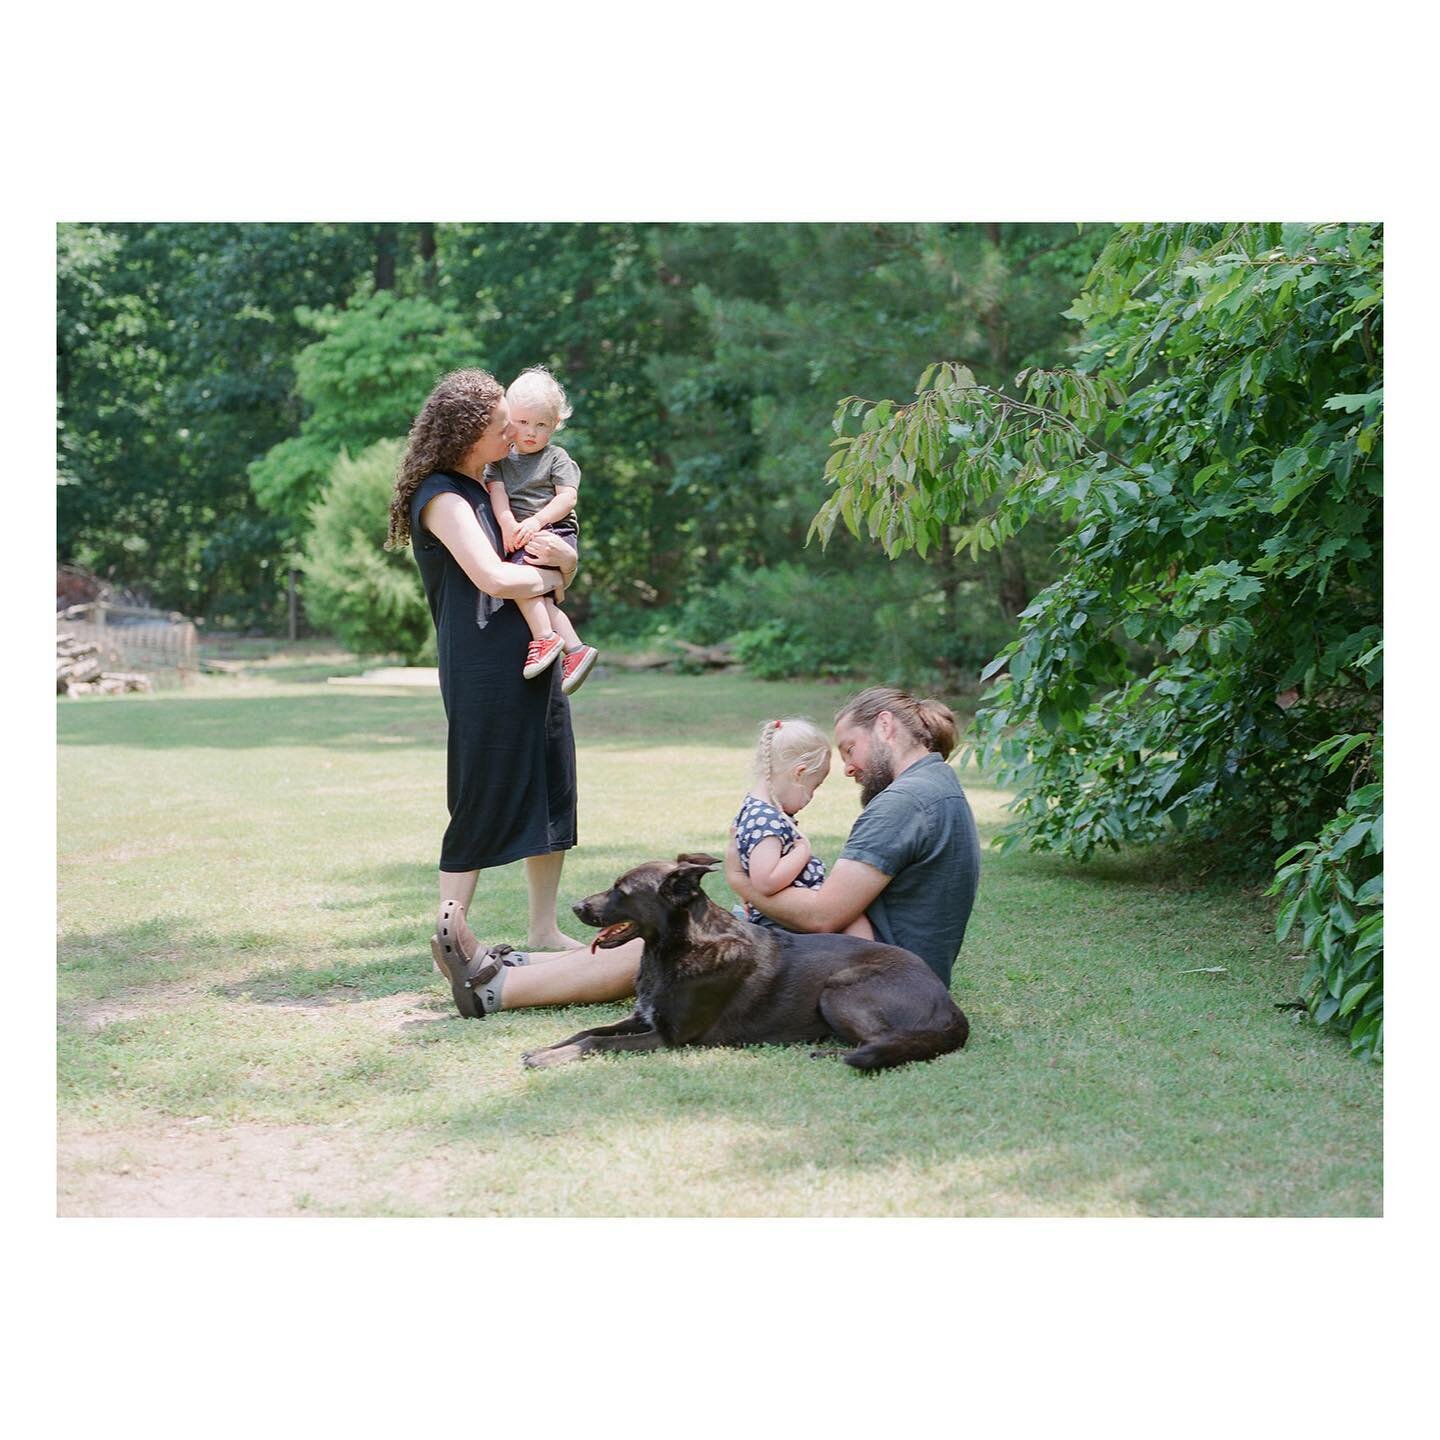 This backyard family session from June has my heart 🤍 We looked at leaves, ran in the grass, caught snakes, and pet the family dog&hellip; little things that are now preserved forever to look back on fondly.